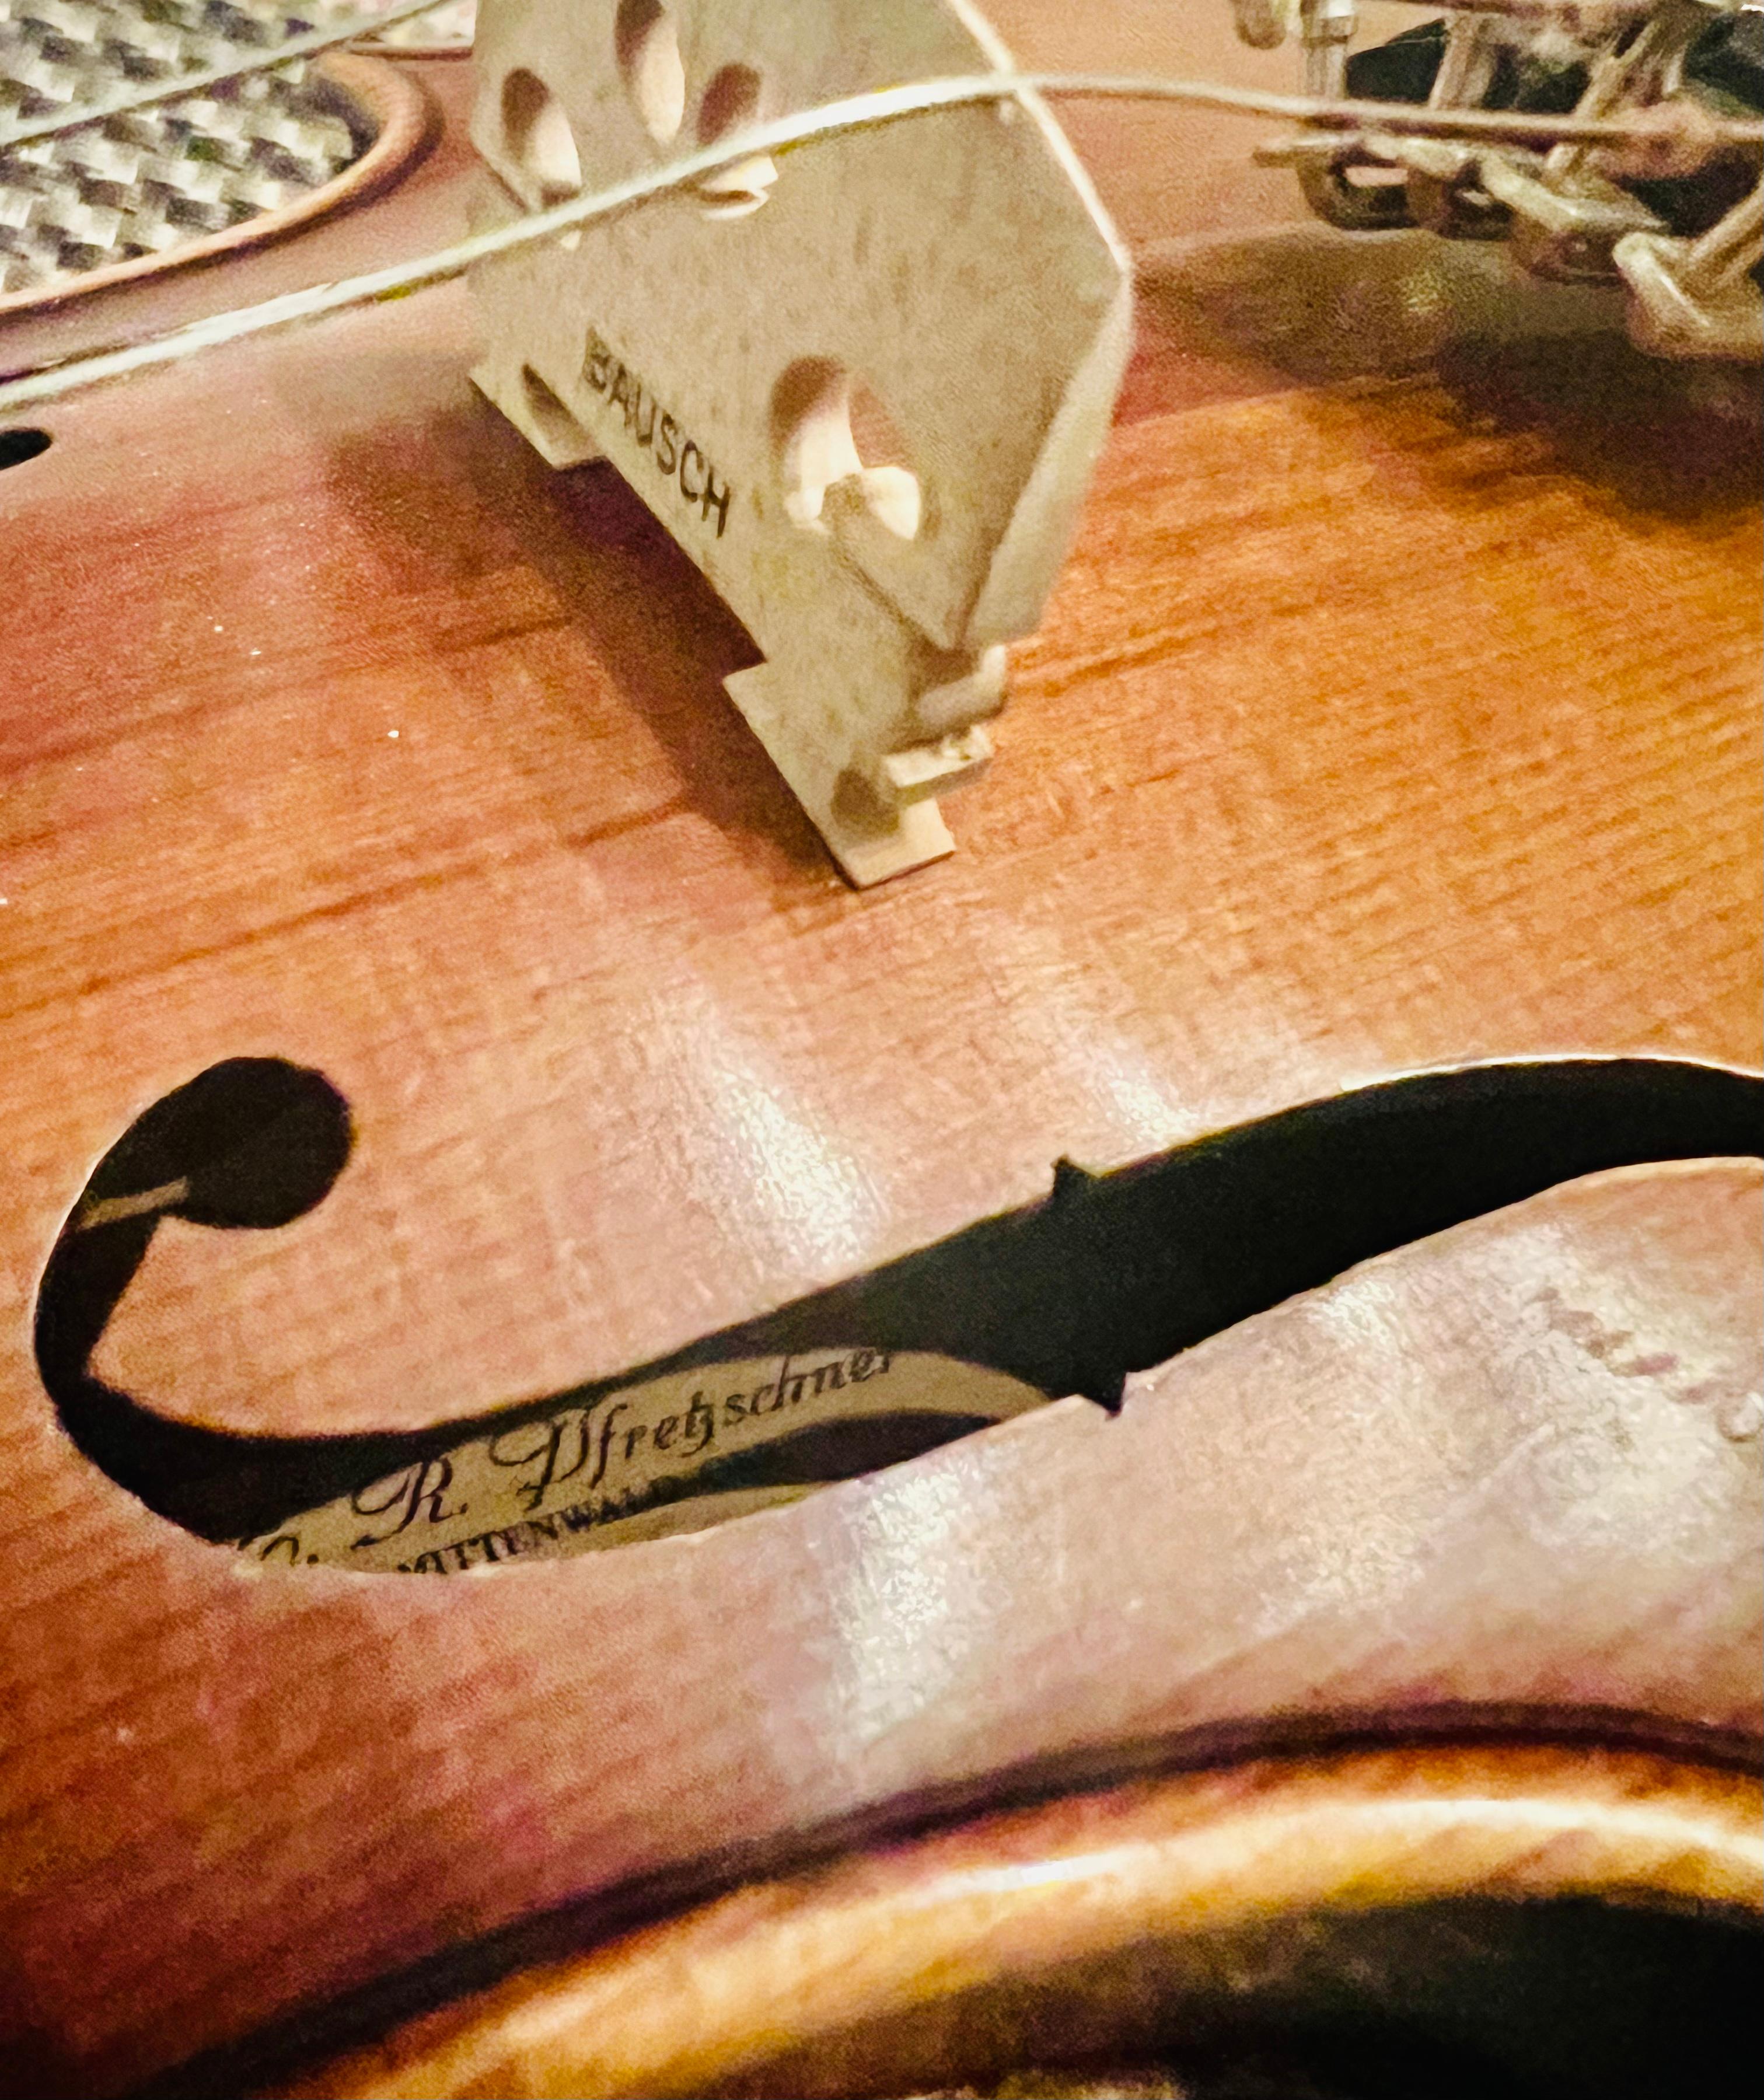 1970 3/4 E.R. Pfretzschner Hand-Crafted Violin in the Style of A. Stradivarius en vente 10